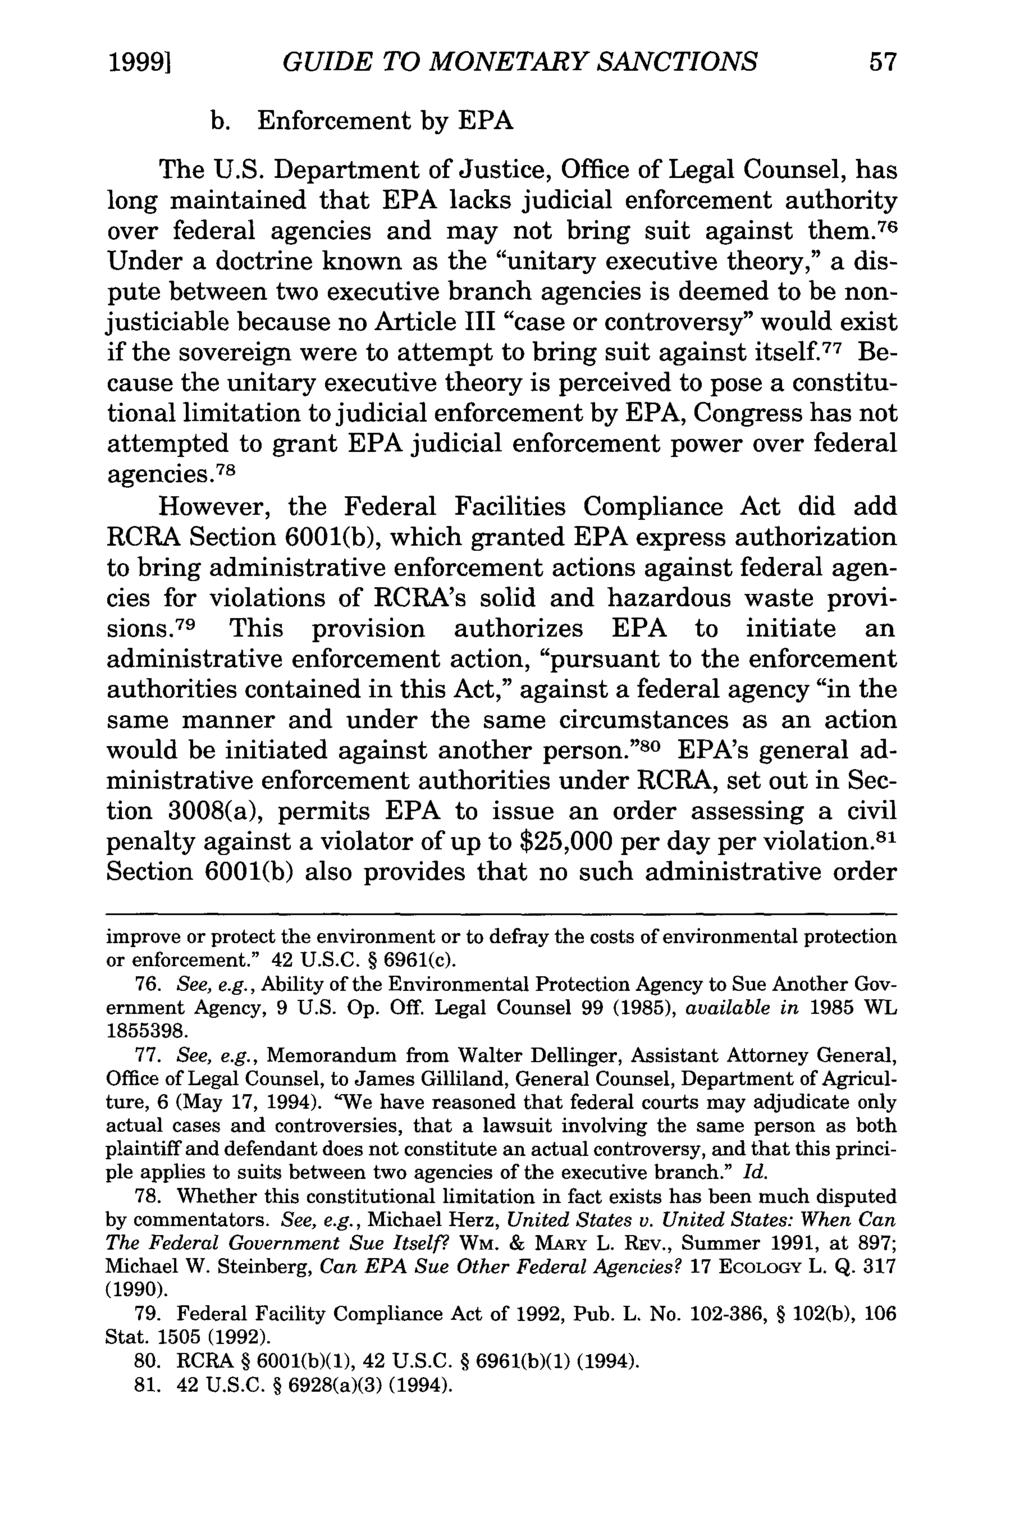 19991 GUIDE TO MONETARY SANCTIONS b. Enforcement by EPA The U.S. Department of Justice, Office of Legal Counsel, has long maintained that EPA lacks judicial enforcement authority over federal agencies and may not bring suit against them.